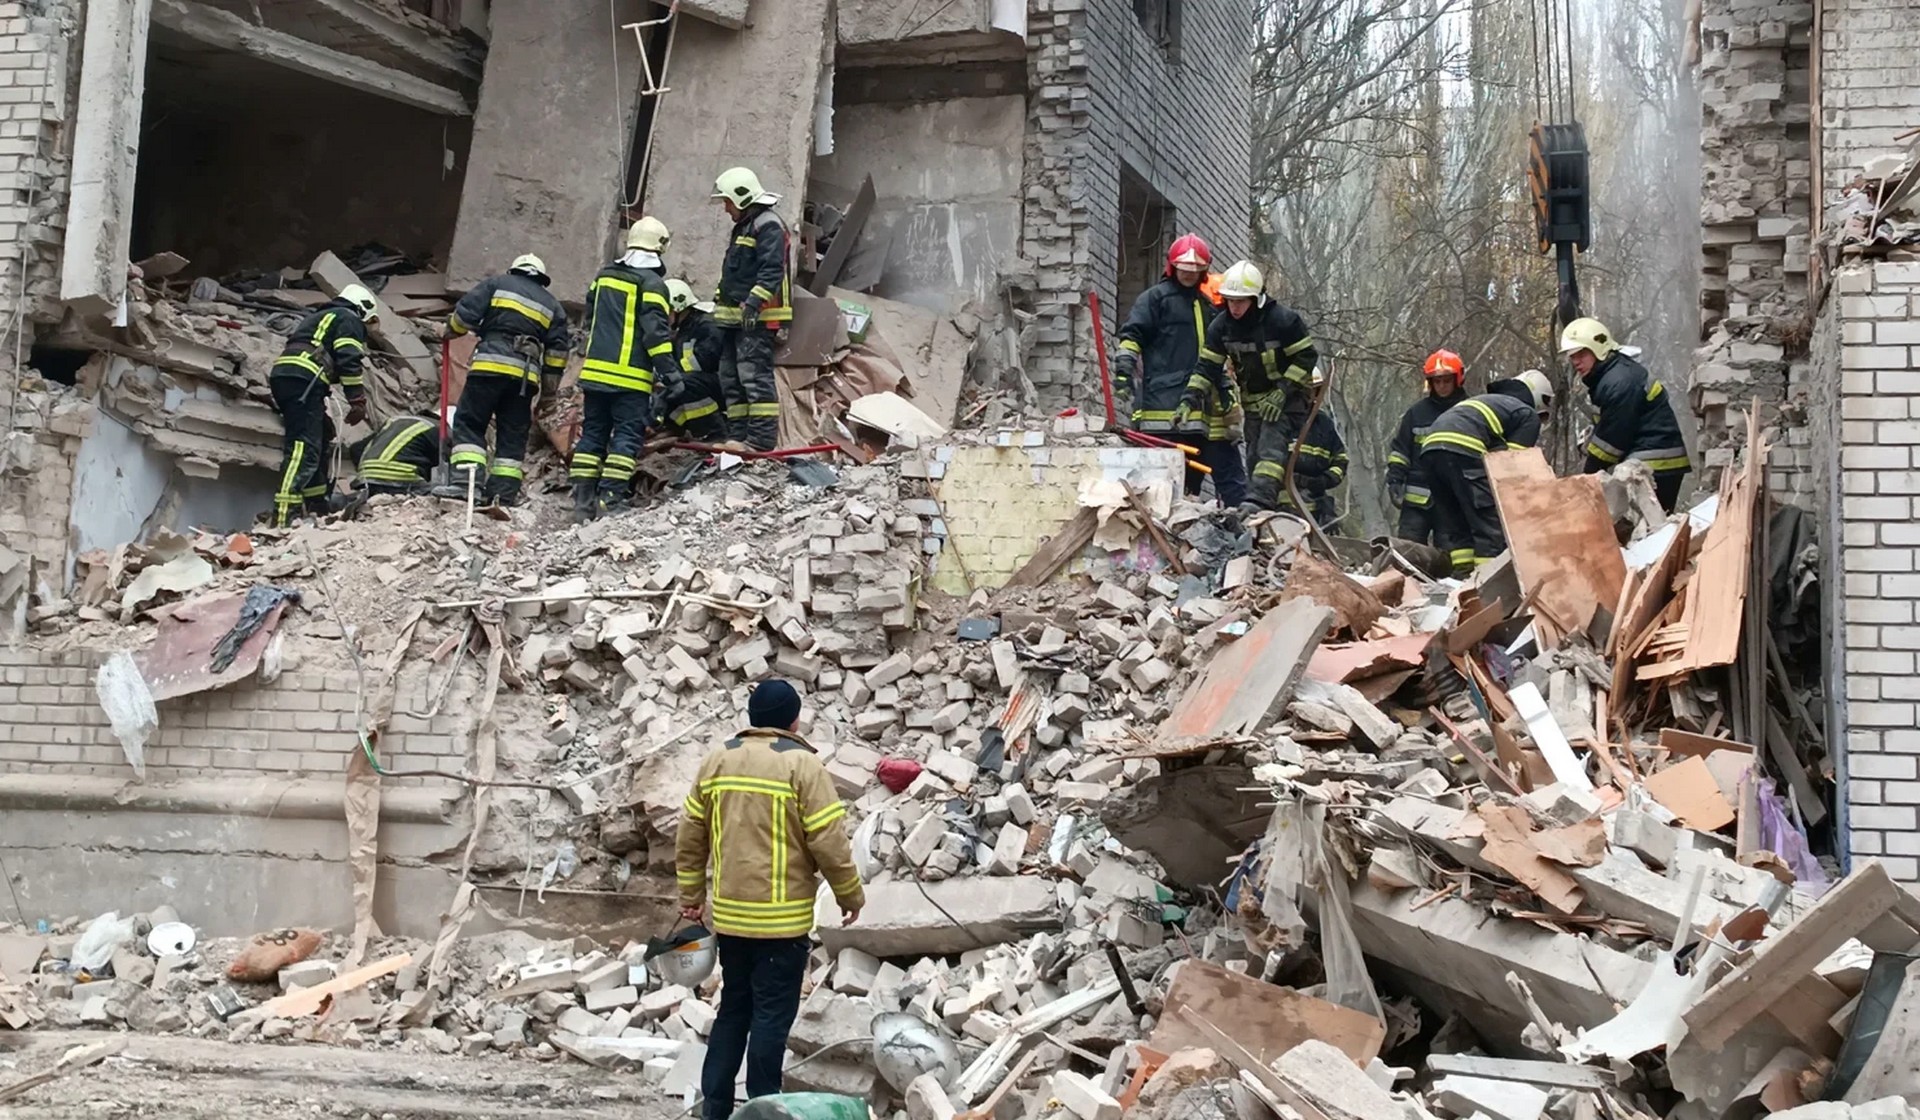 Rescuers work at a site of a residential building heavily damaged by a Russian missile attack in Mykolaiv